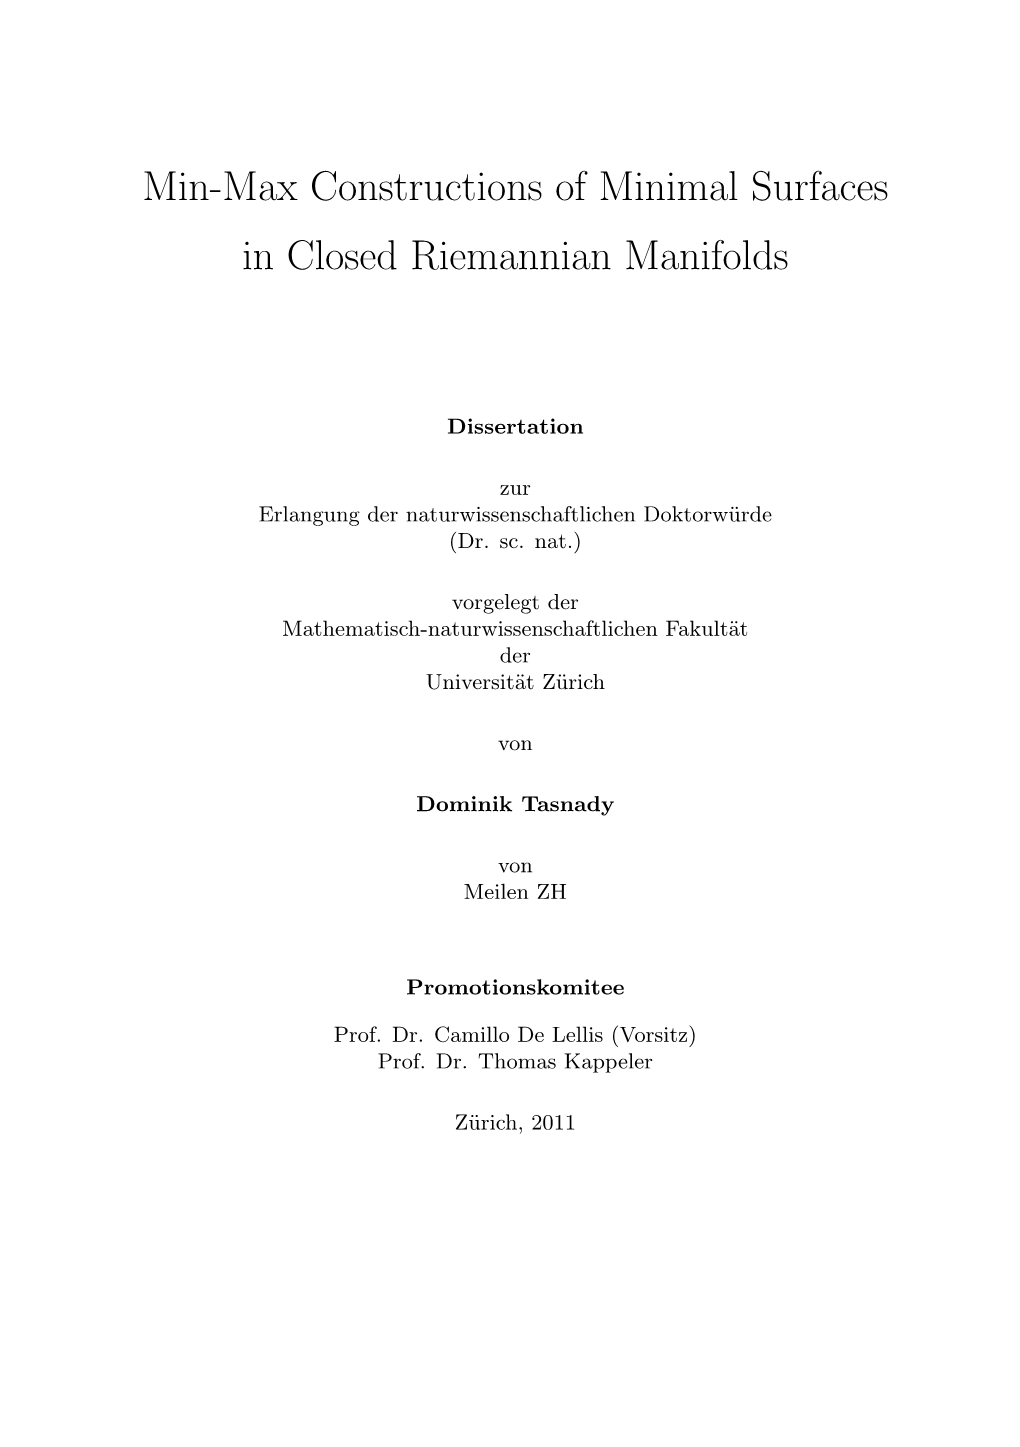 Min-Max Constructions of Minimal Surfaces in Closed Riemannian Manifolds